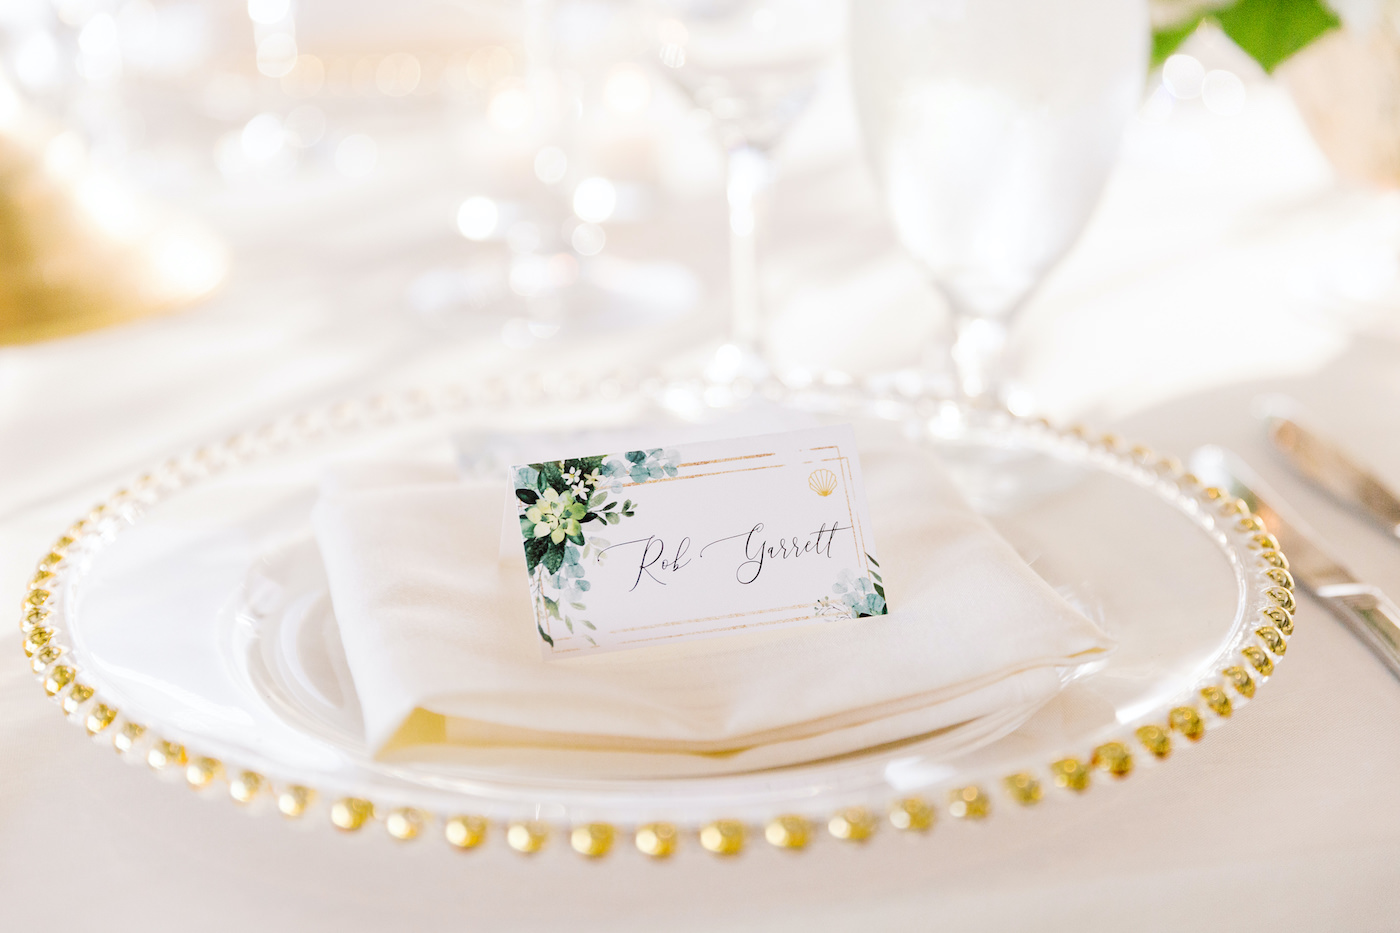 Elegant Wedding Reception Decor, Clear and Gold Beaded Charger with White Linen Napkin and Floral Seating Card | Tampa Bay Wedding Charger Rental Gabro Event Services